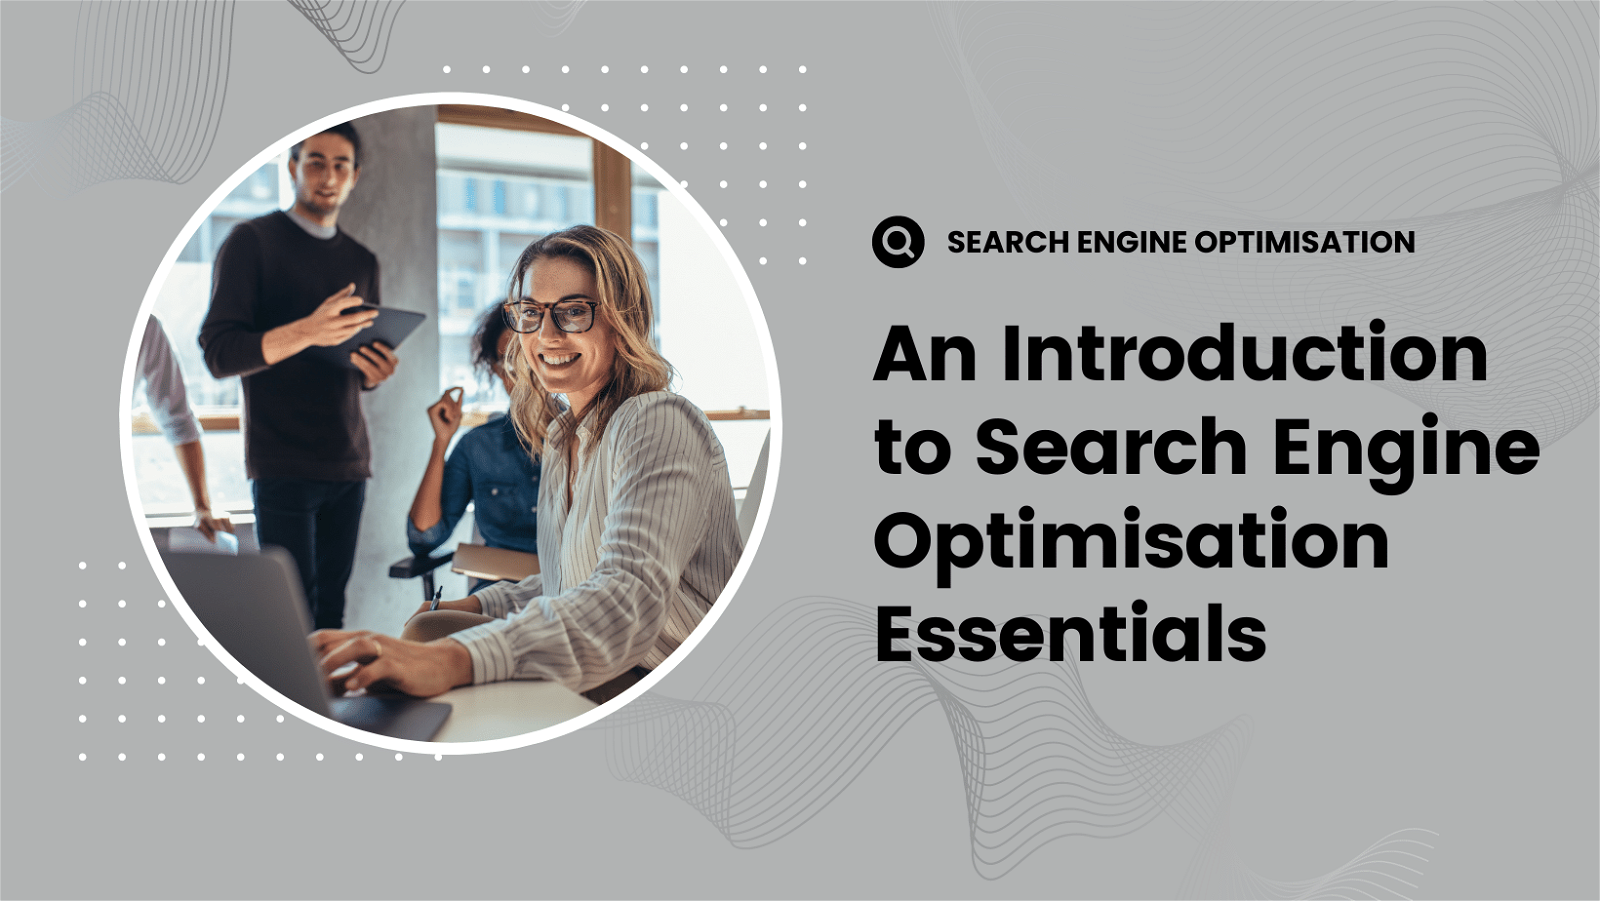 A presentation slide titled 'an introduction to search engine optimisation essentials' with an image of a smiling woman wearing glasses seated at a laptop and a man in the background gesturing as if explaining something.